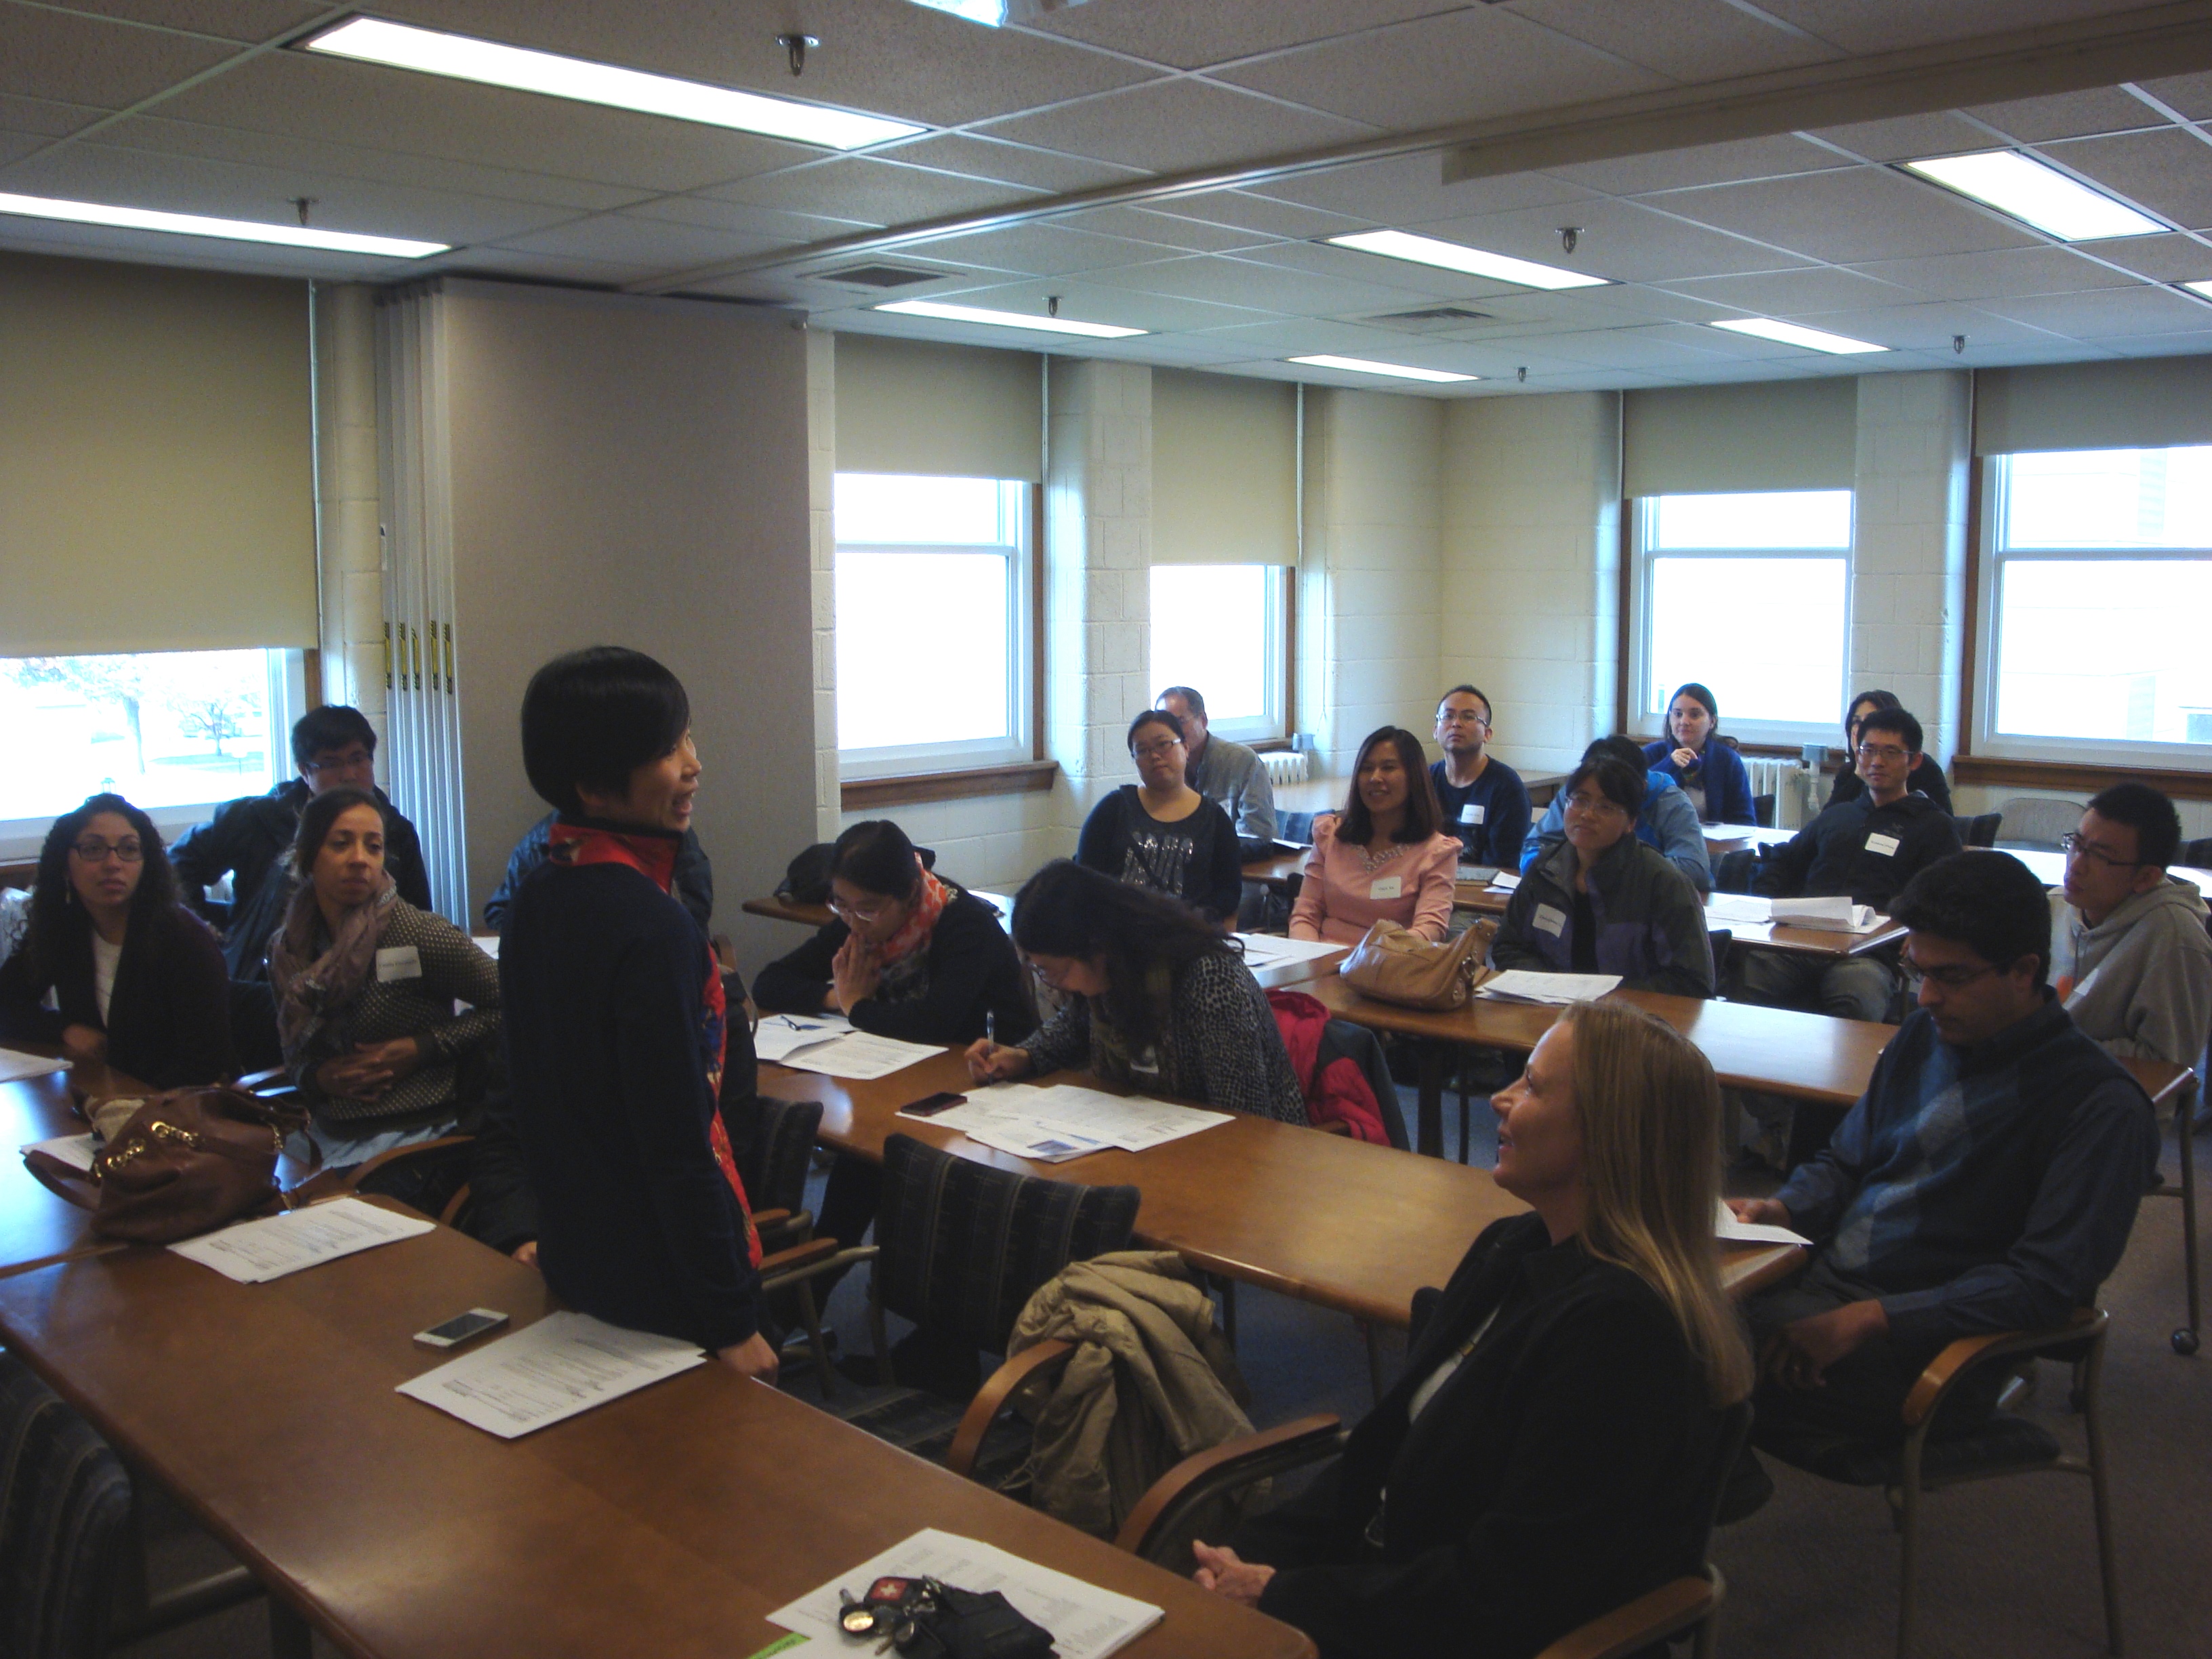 Visiting scholar Dr. Weihua Xiao of China Agricultural University, China, introduces herself and her work